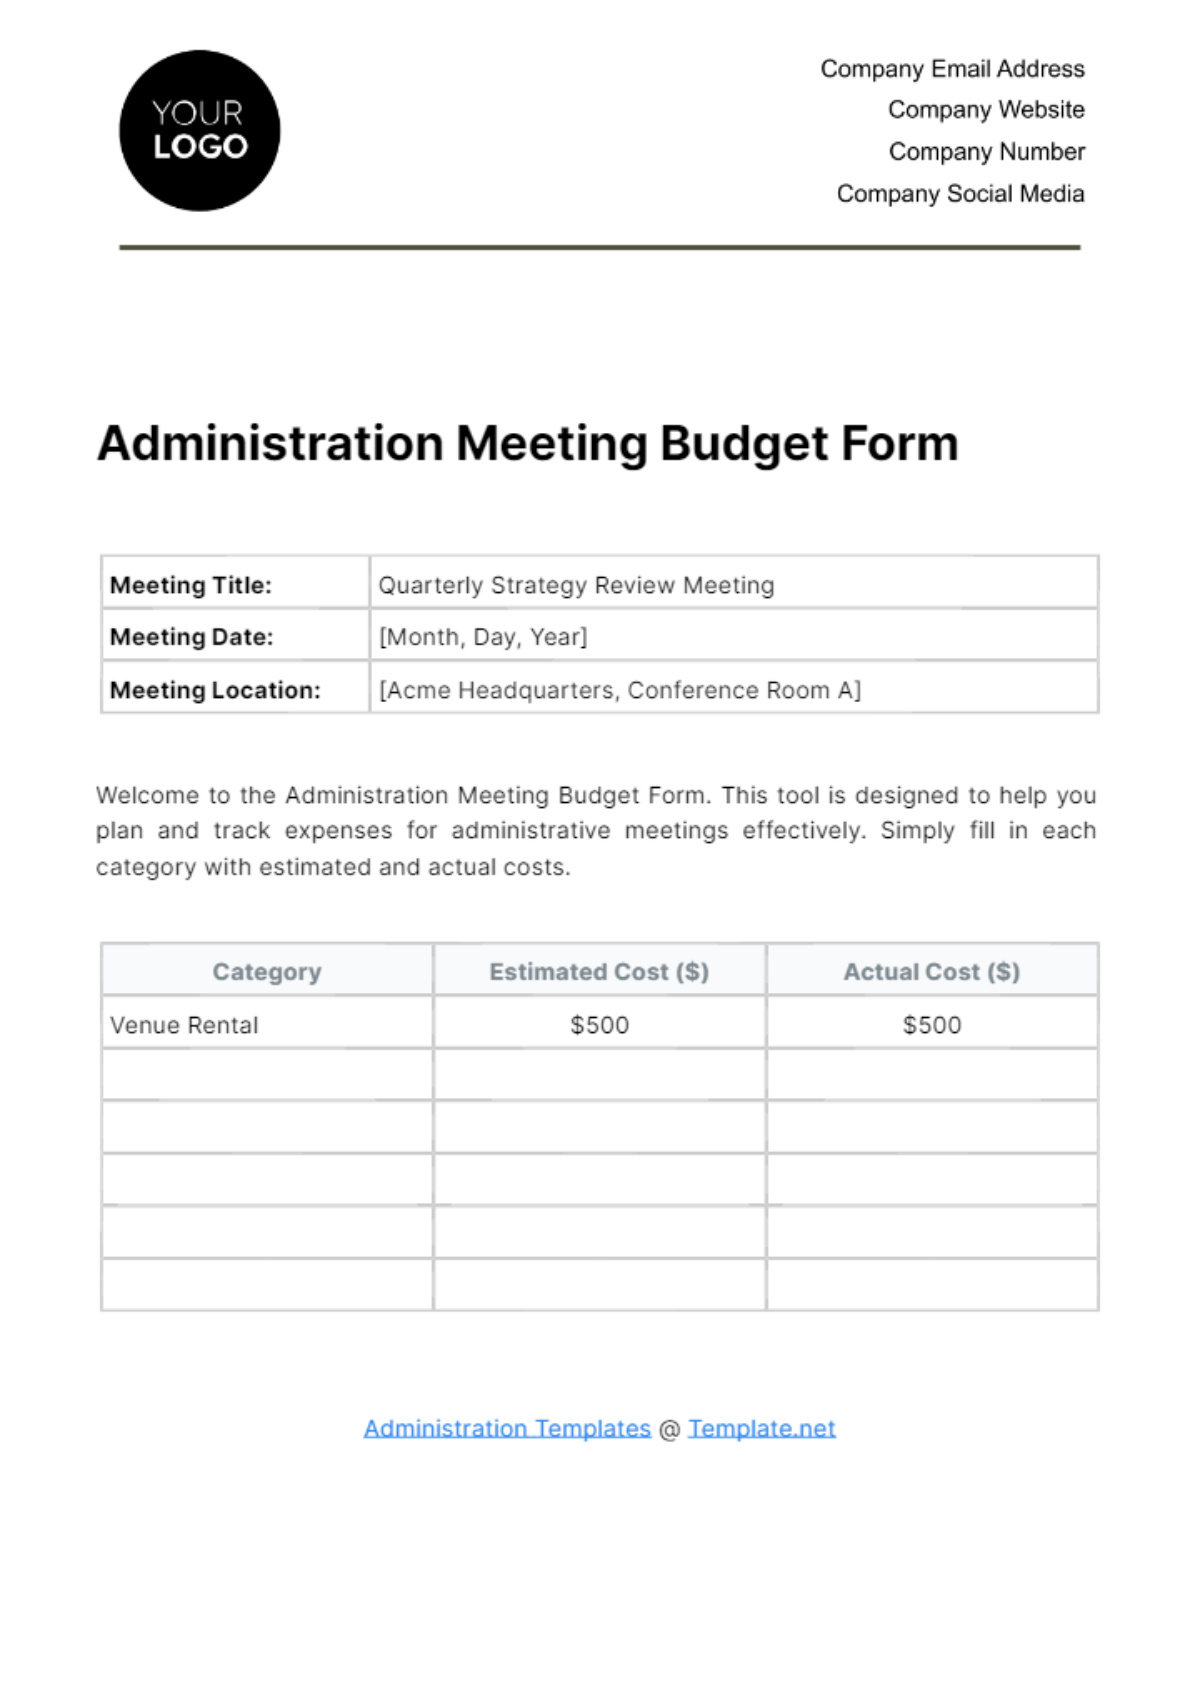 Administration Meeting Budget Form Template